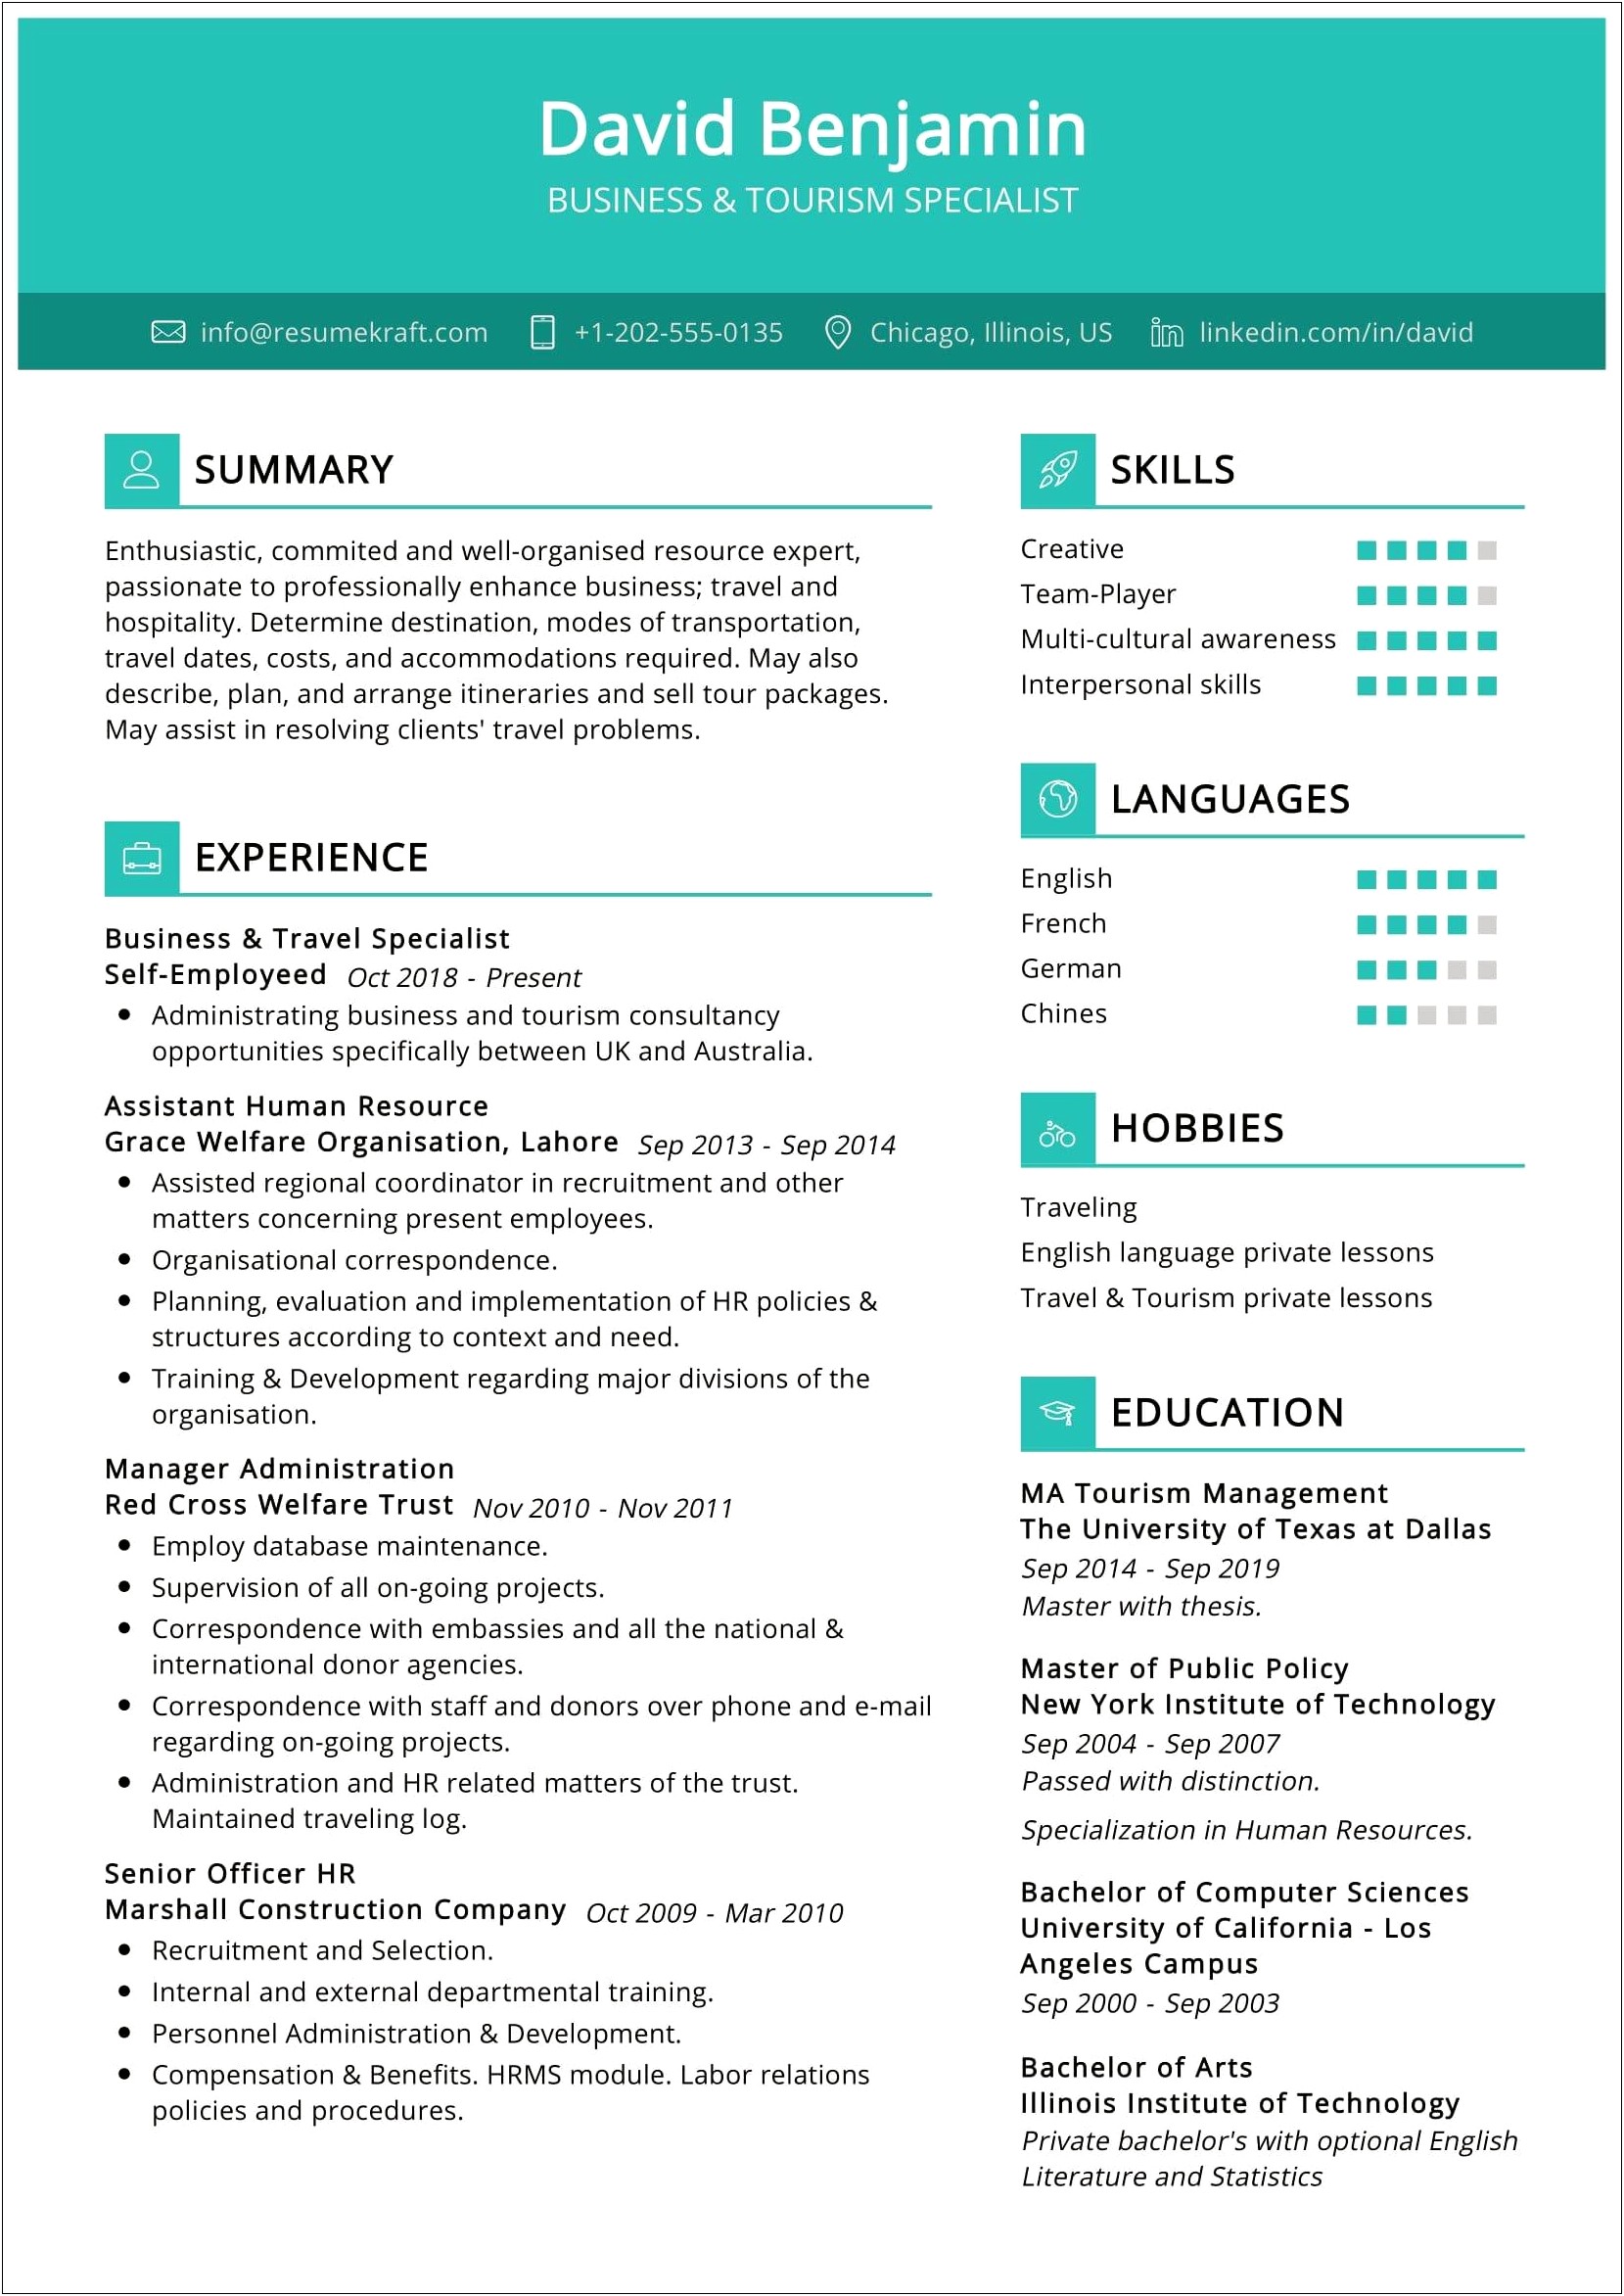 Airline Check In Agent Resume Sample